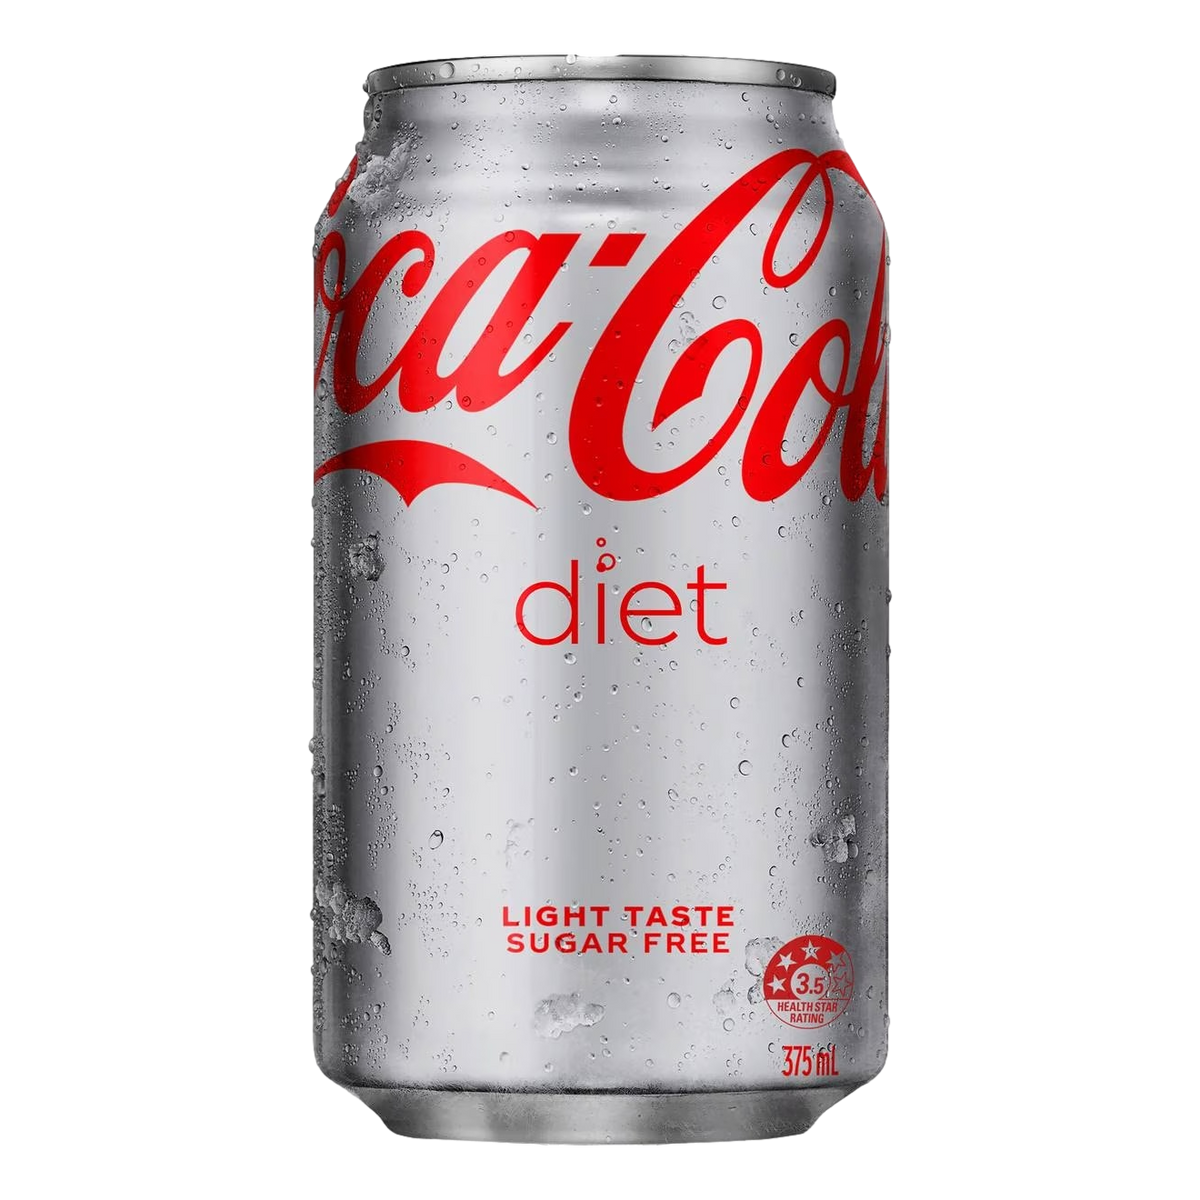 Coca-Cola Diet 375ml Can Case of 24